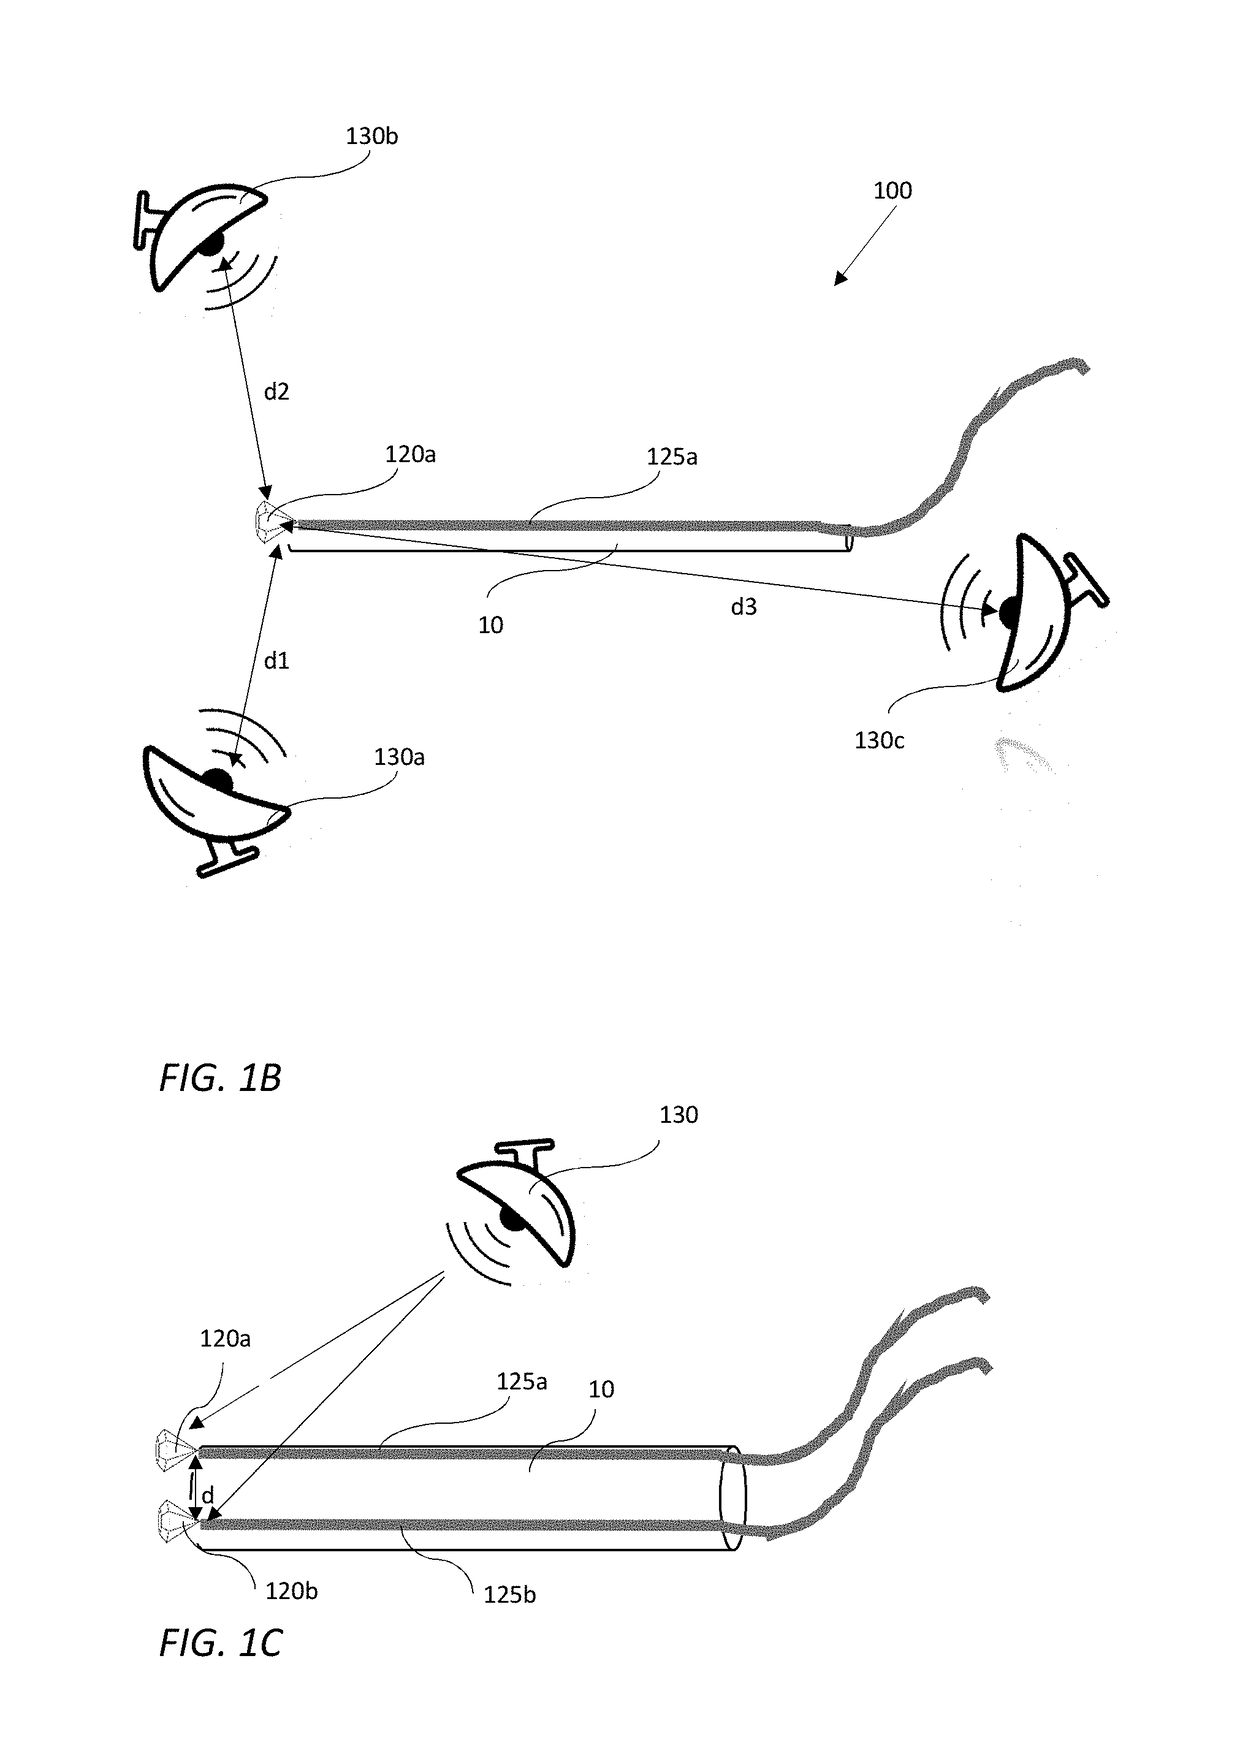 Position detectors for in-vivo devices and methods of controlling same